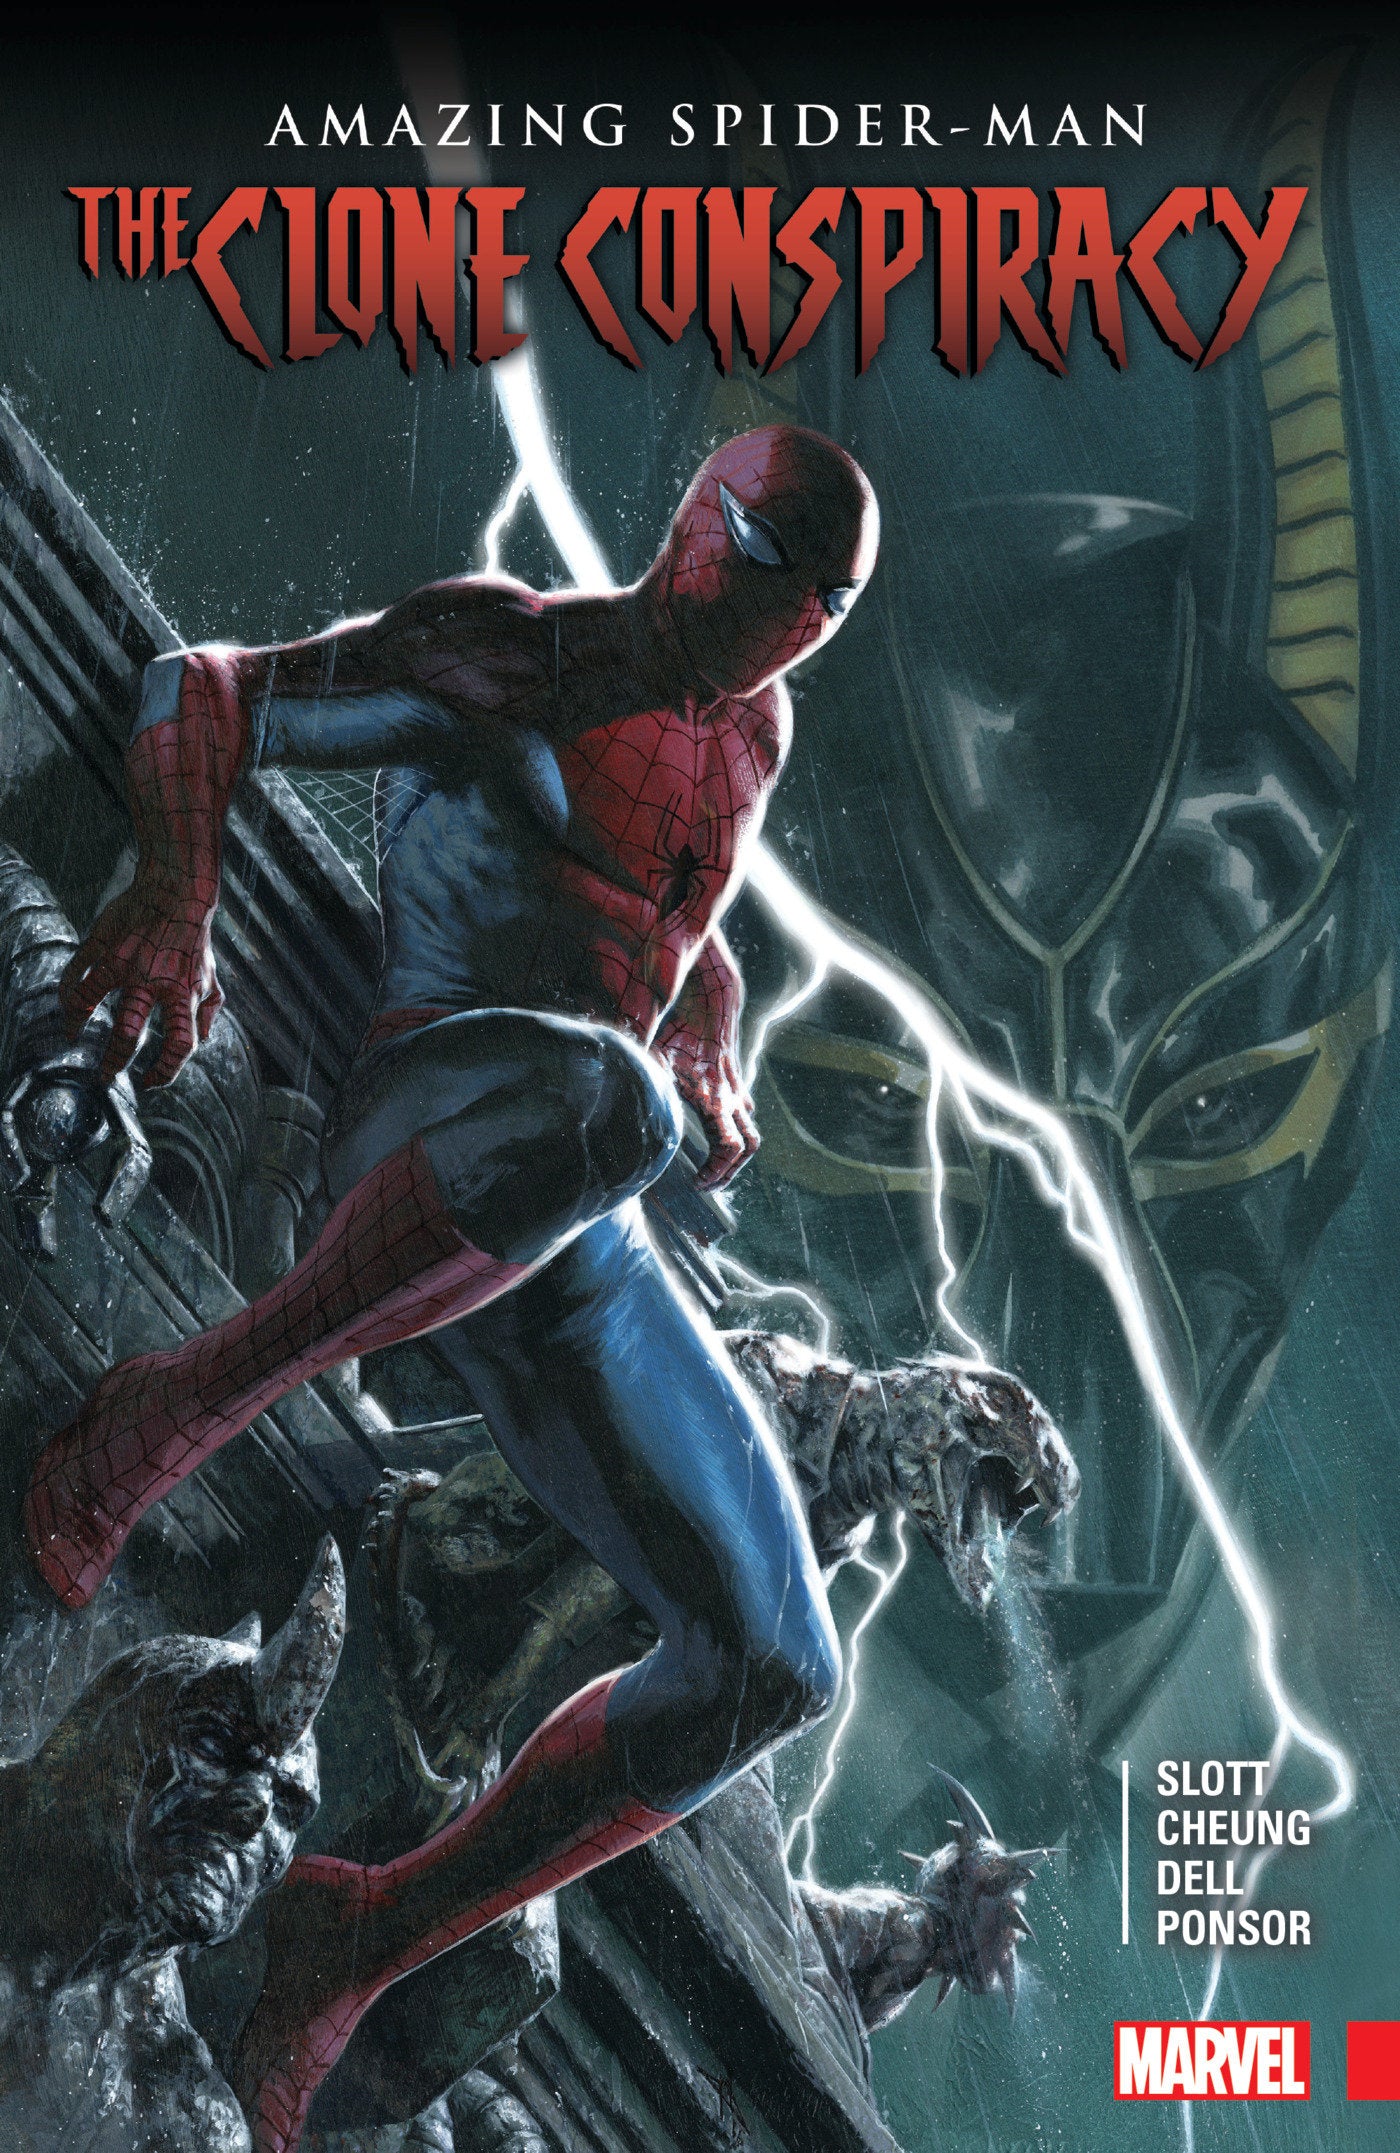 AMAZING SPIDER-MAN: THE CLONE CONSPIRACY TRADE PAPERBACK